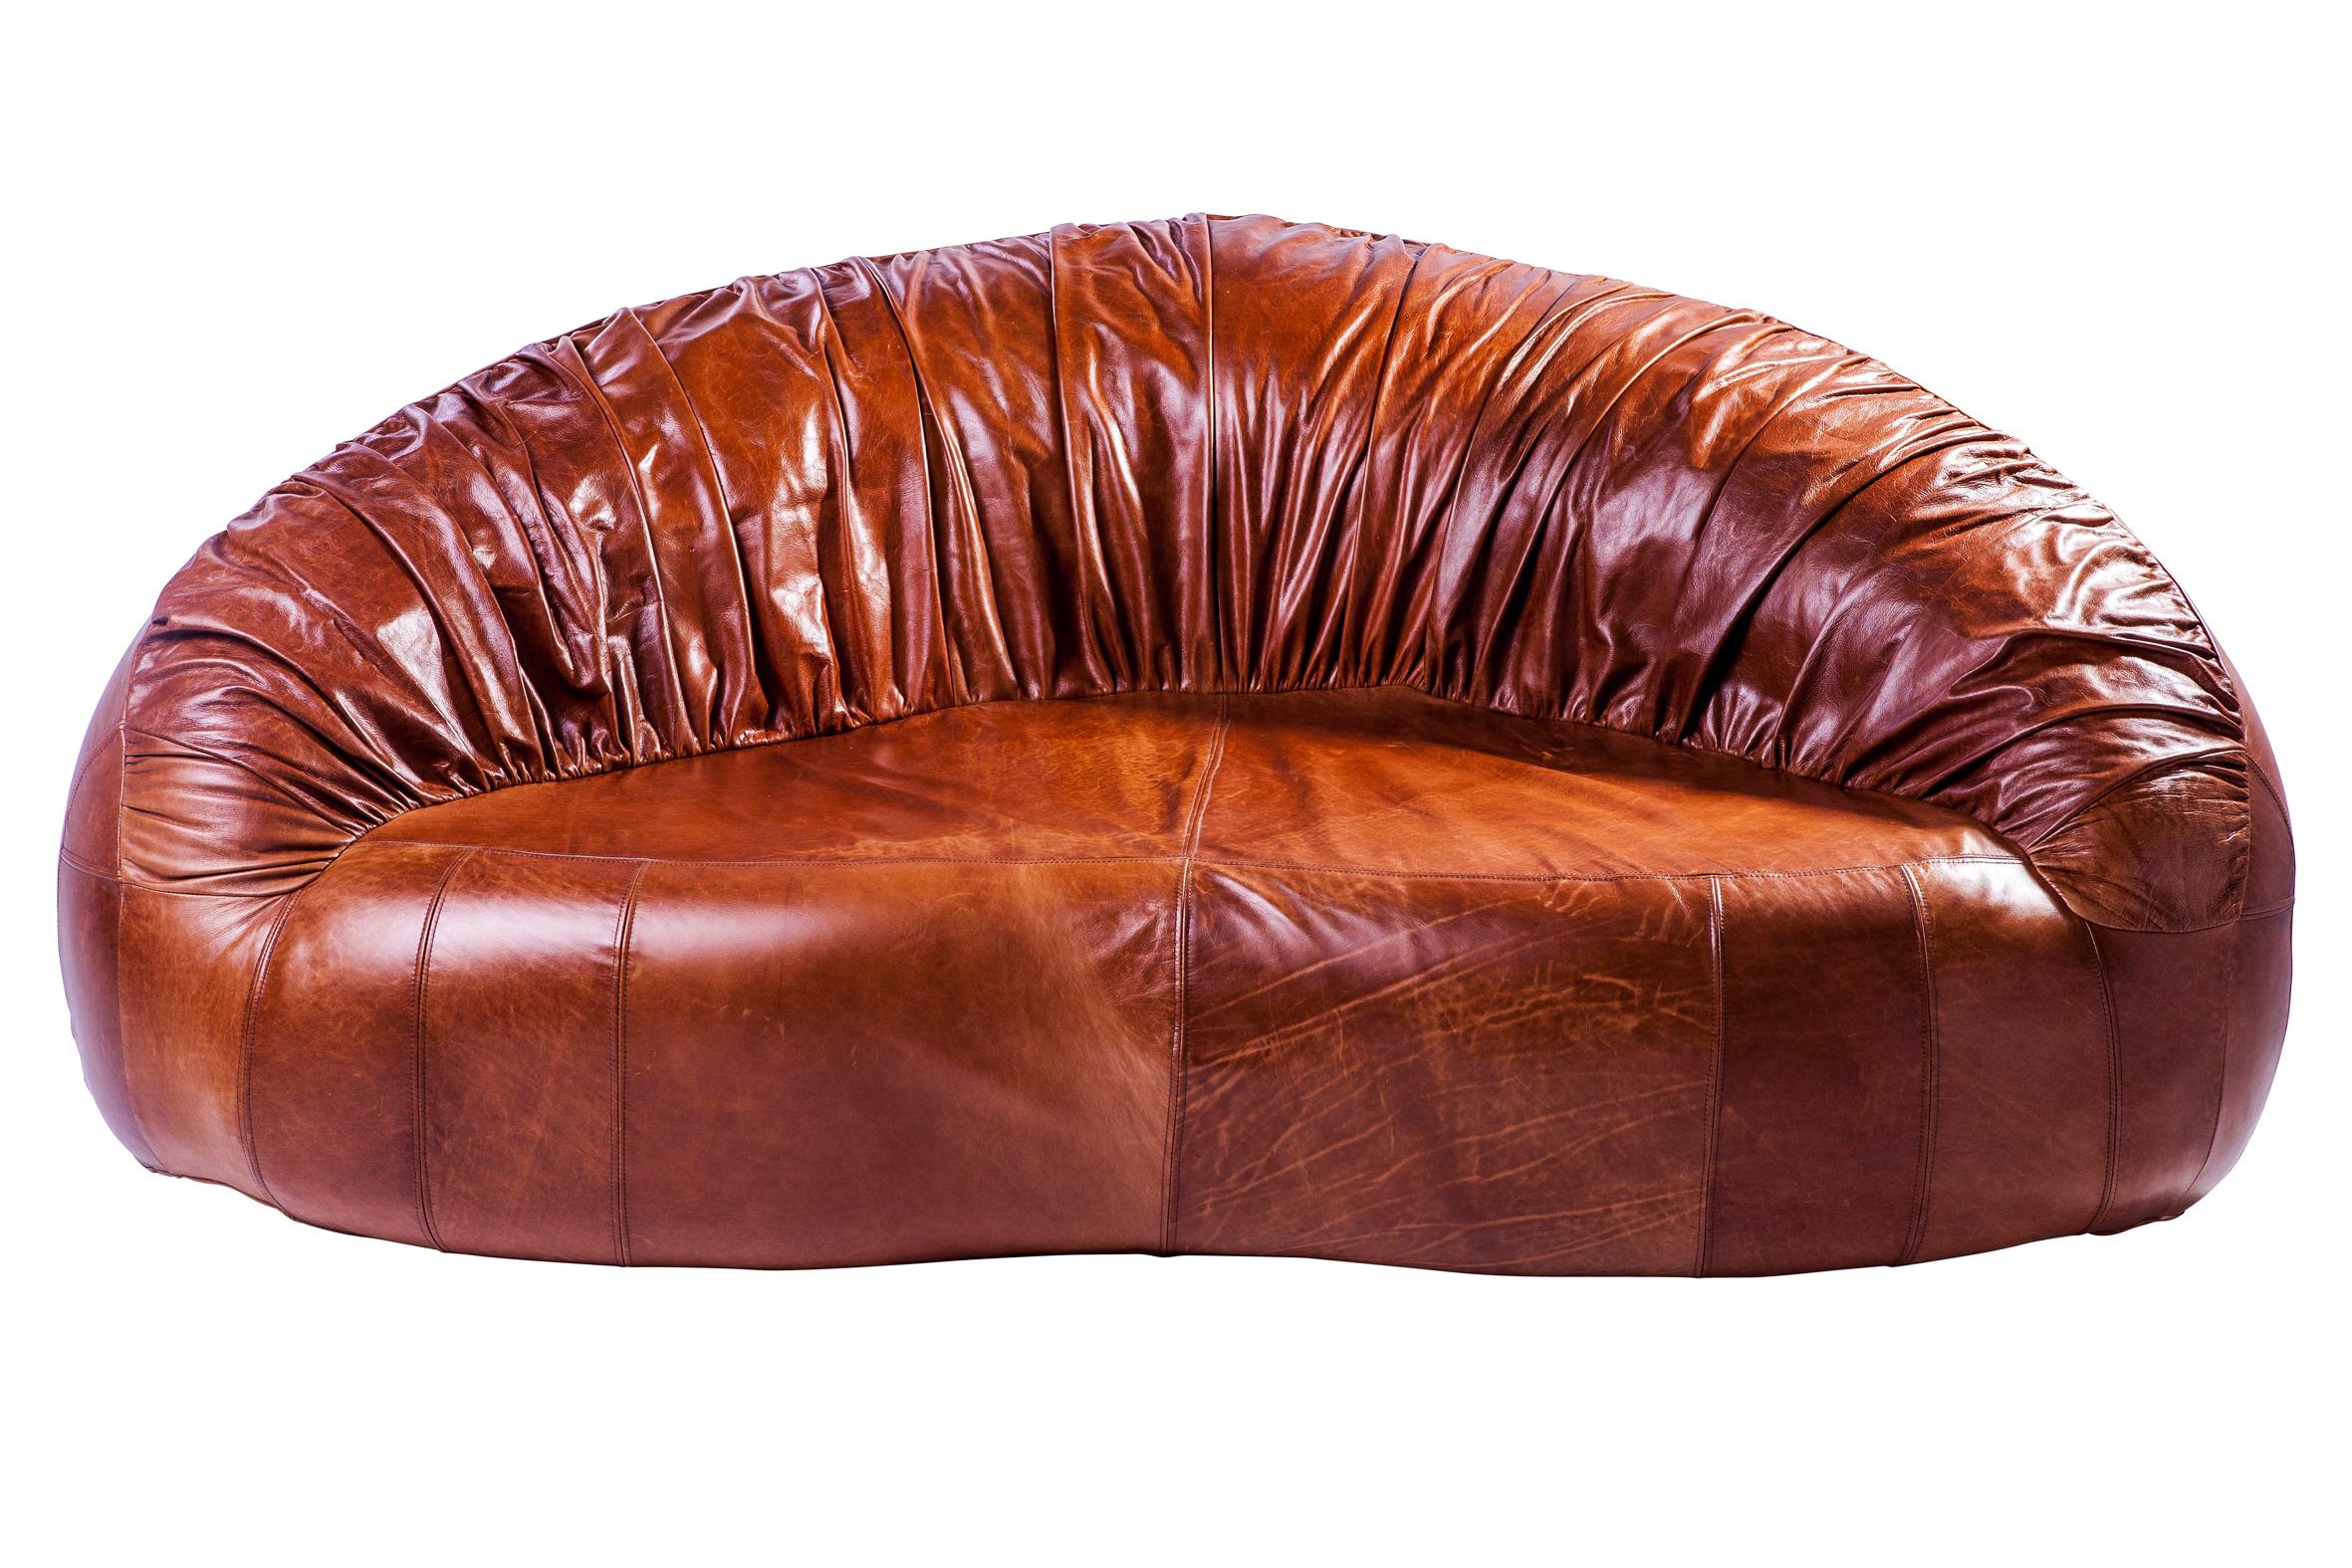 Pangolin sofa by Egg Designs
Dimensions: 200 L x 130 D x 75 H
Materials: Foam inner, leather upholstery

Founded by South Africans and life partners, Greg and Roche Dry - Egg is a unique perspective in contemporary furniture inspired with a soul